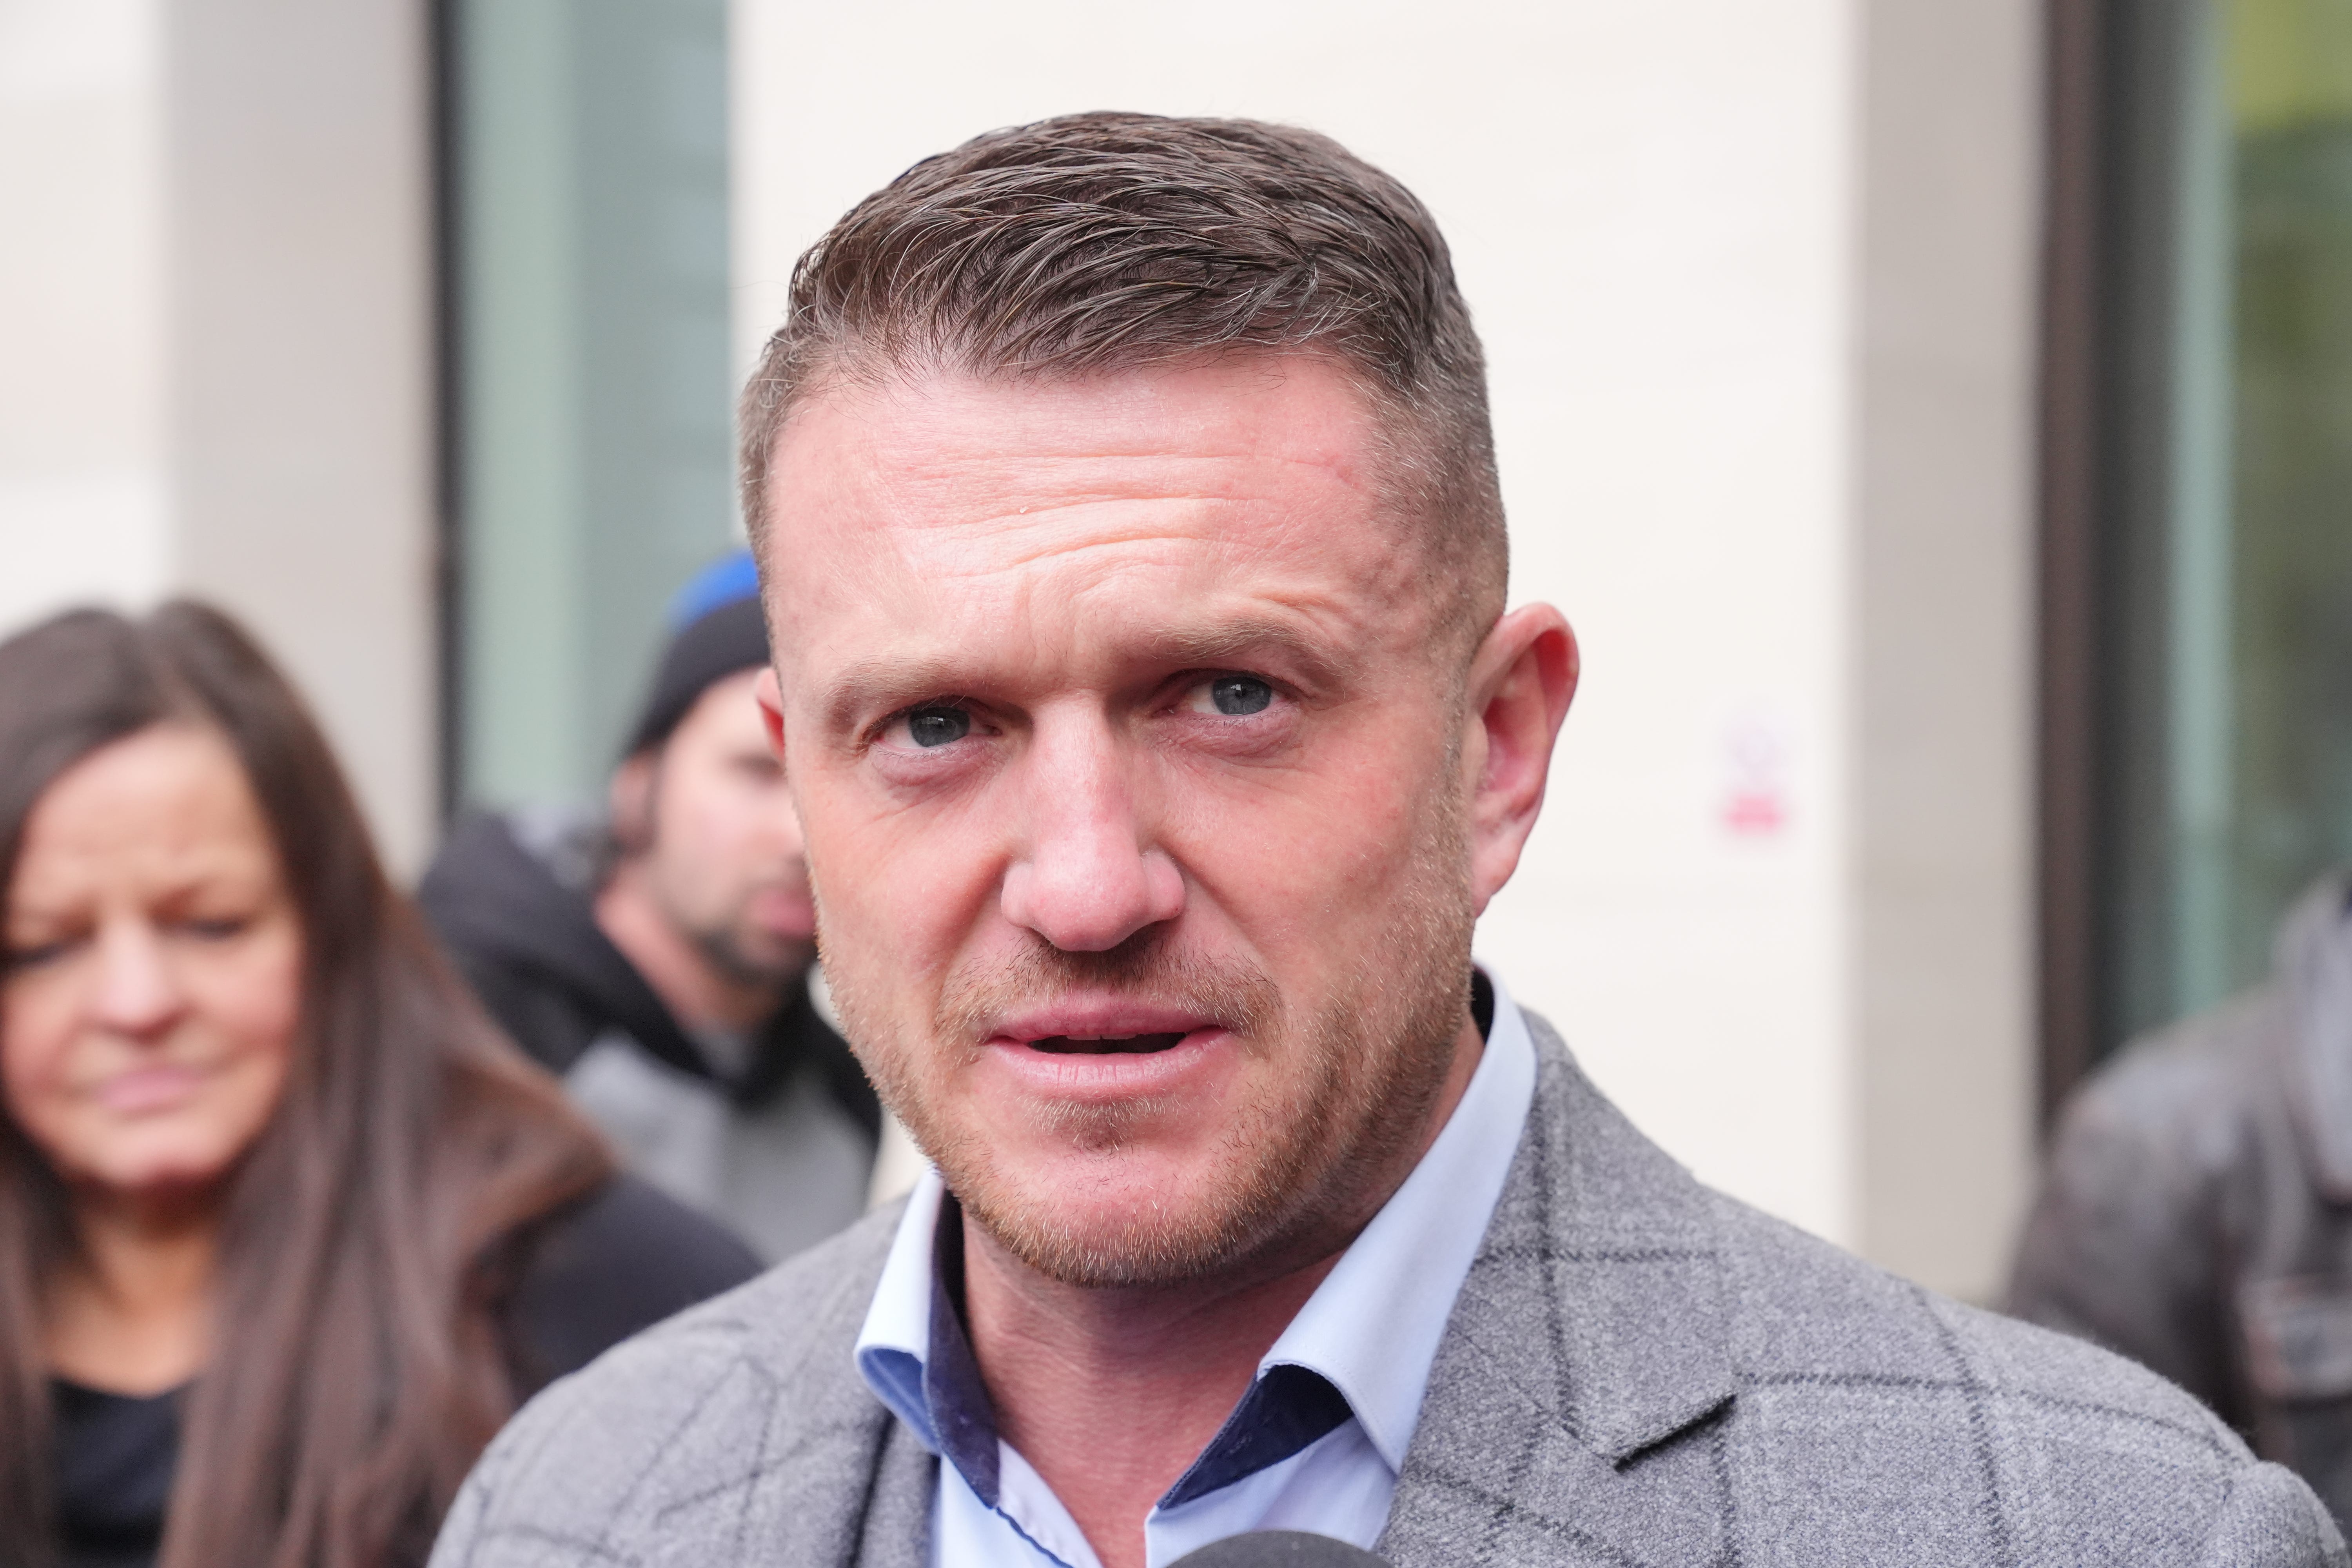 Tommy Robinson is on trial at Westminster Magistrates’ Court